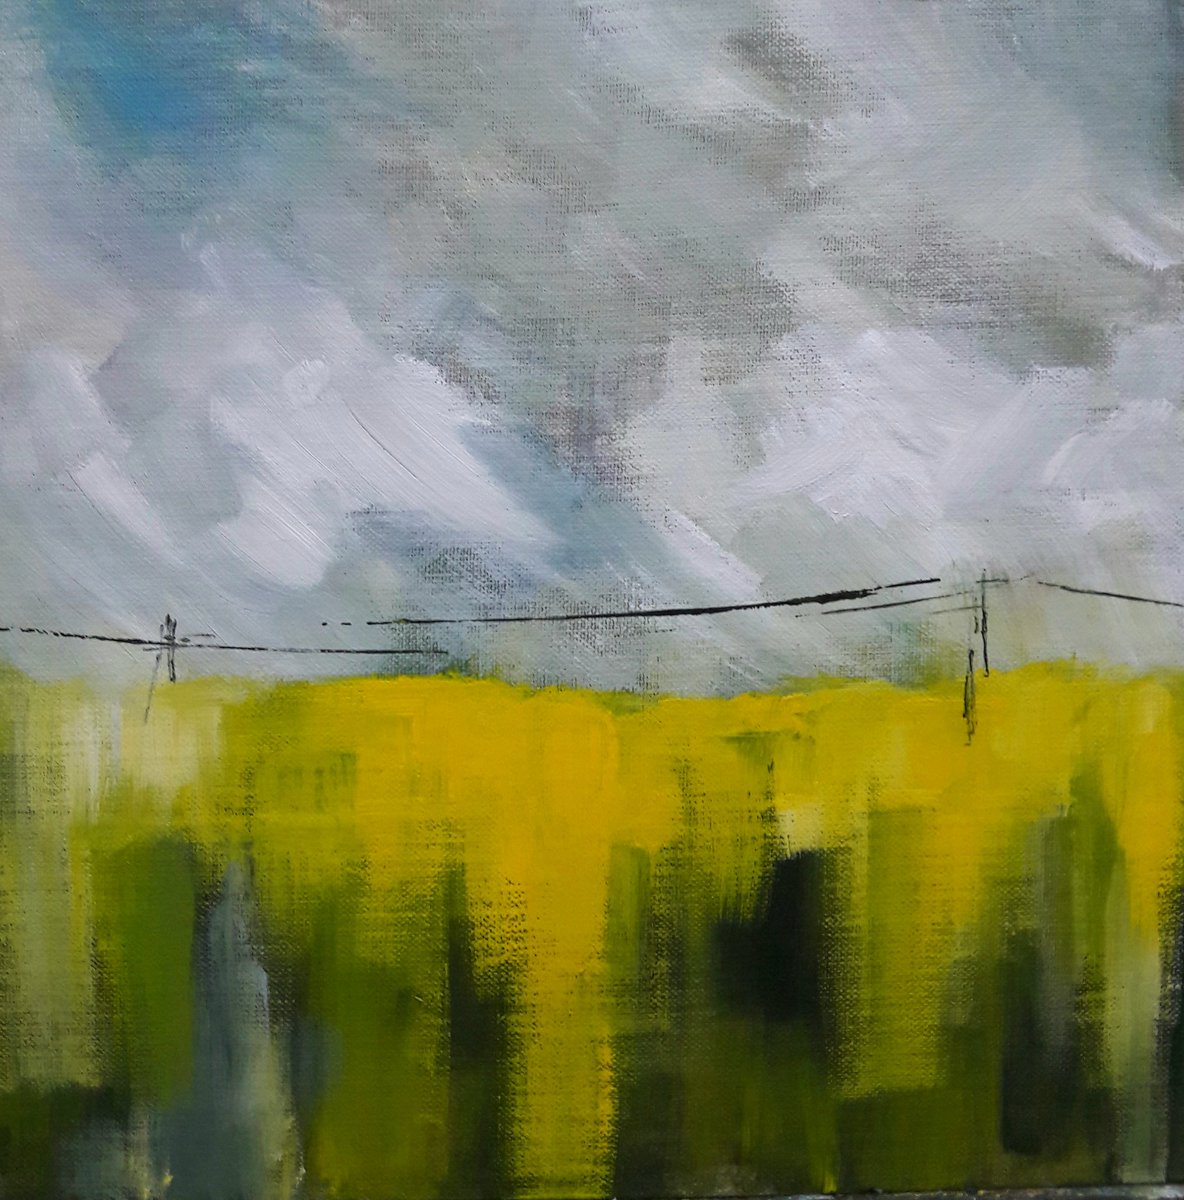 Oilseed rape and pilons. Acrylic sketch. #yorkshire #spring #acrylic #humanintervention #hayfever #yellow